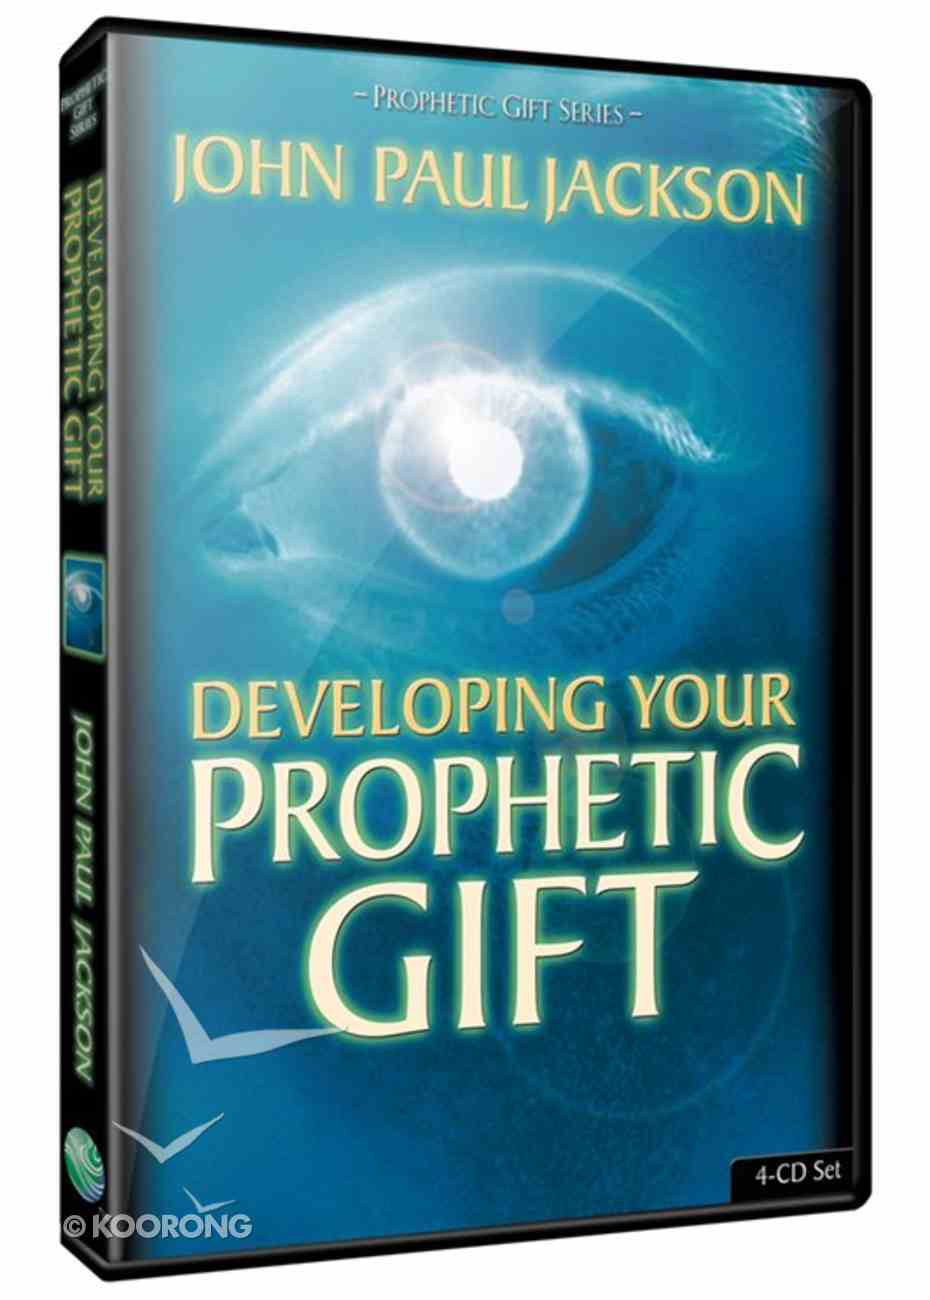 Developing Your Prophetic Gift CD